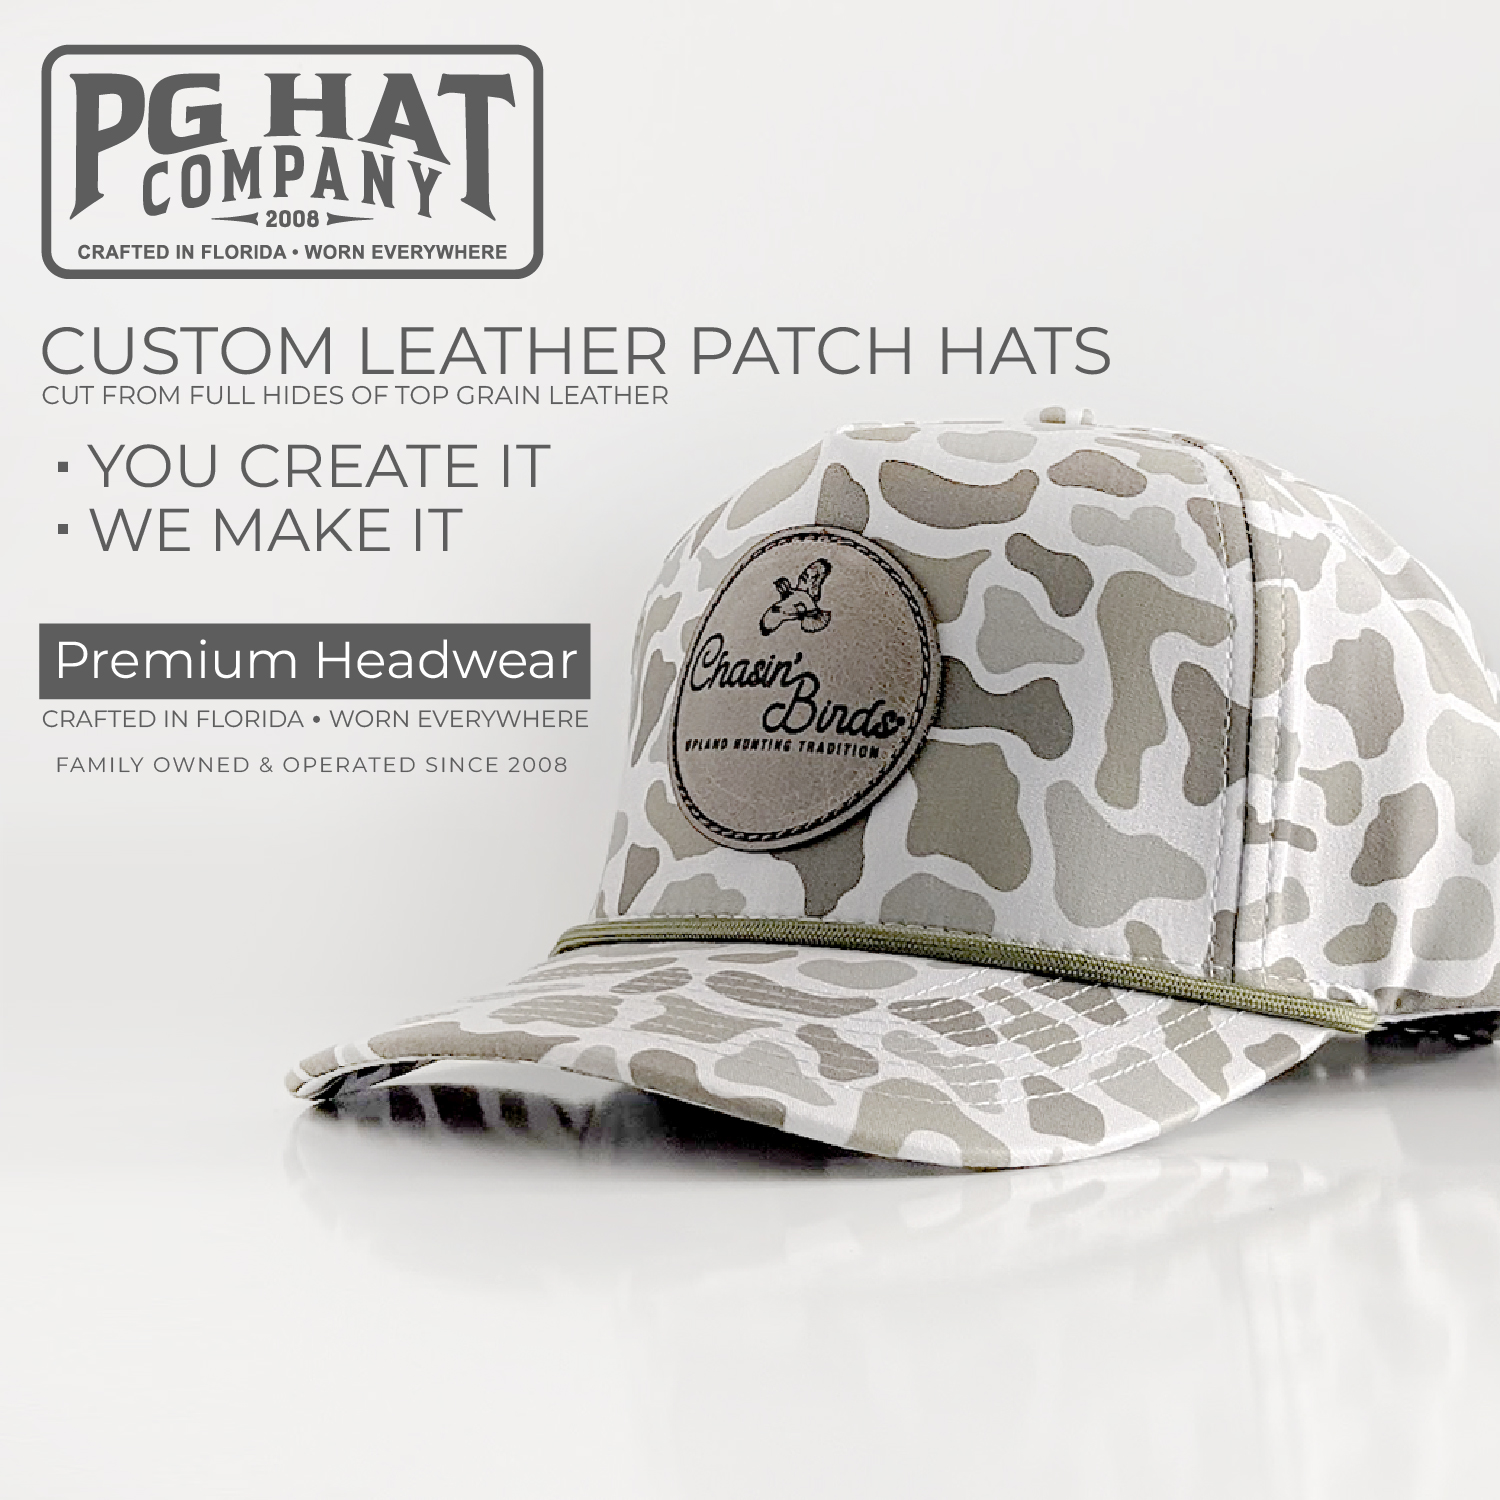 PG Hat Co. Handcrafted Leather Patch Hats in Pace, FL